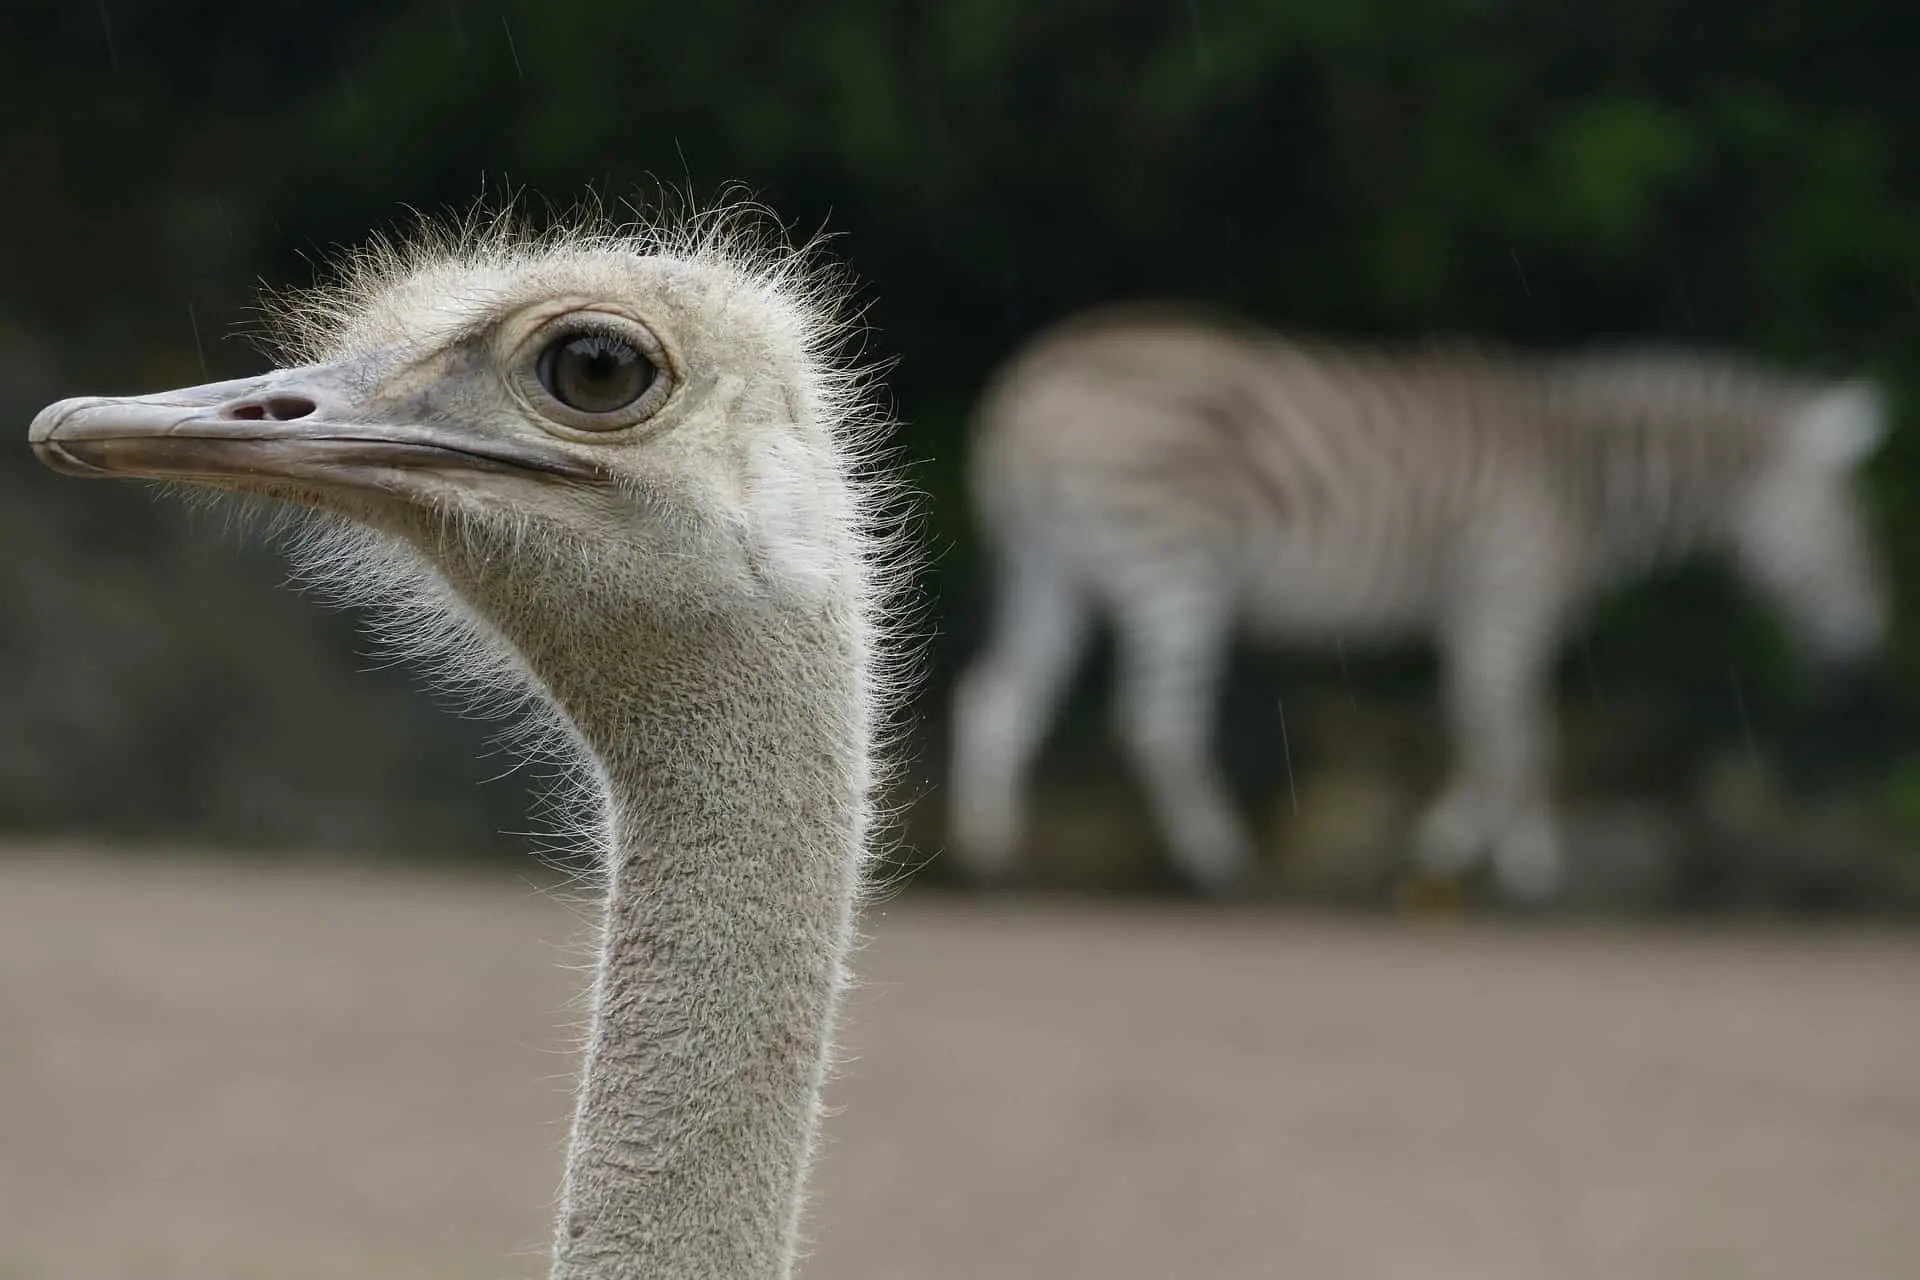 how do ostriches and zebras work together